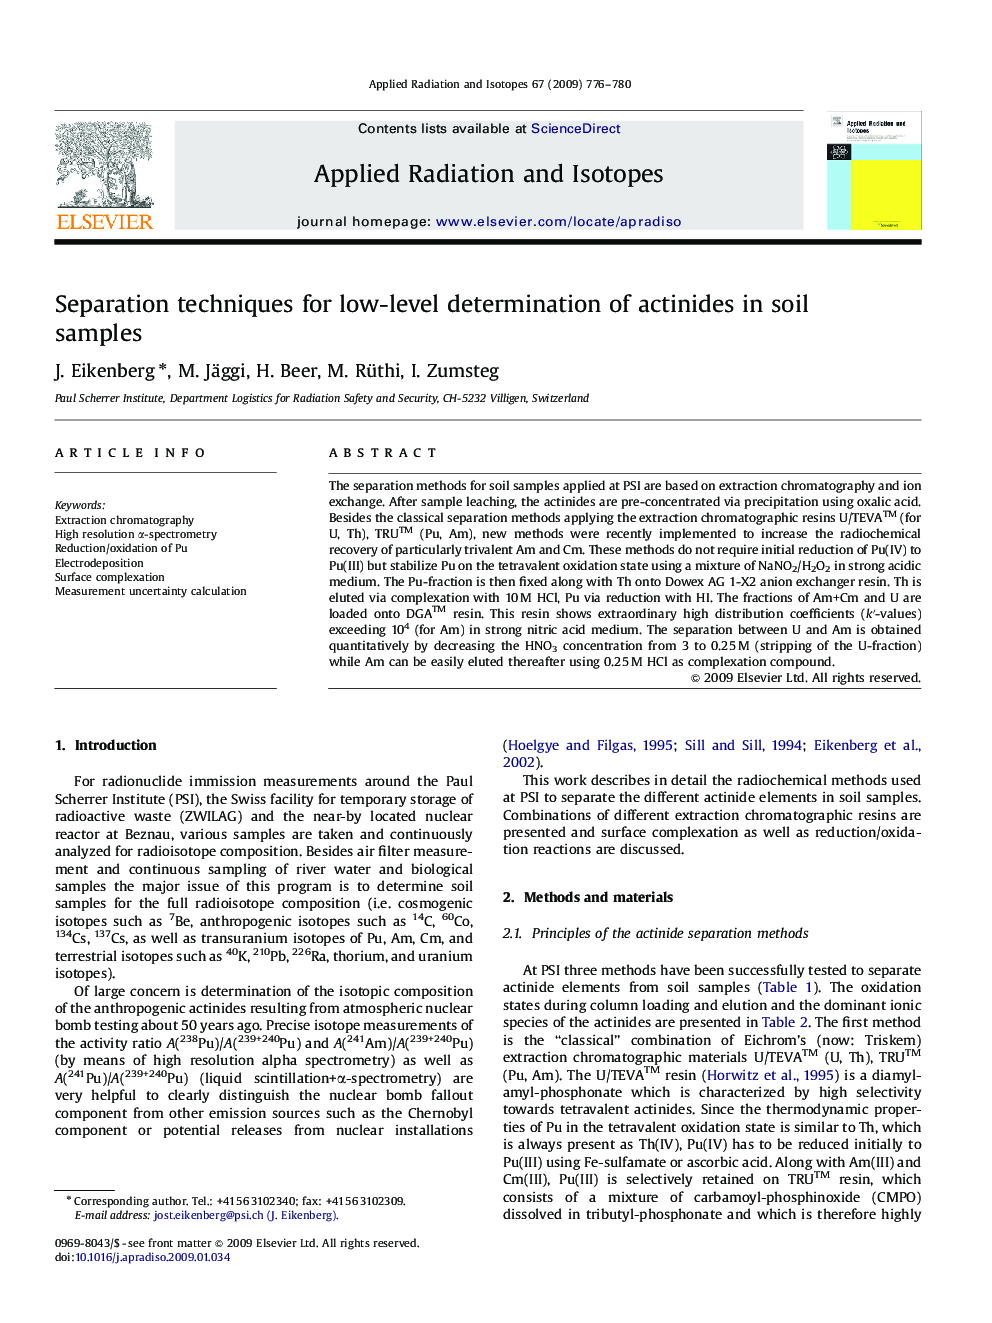 Separation techniques for low-level determination of actinides in soil samples